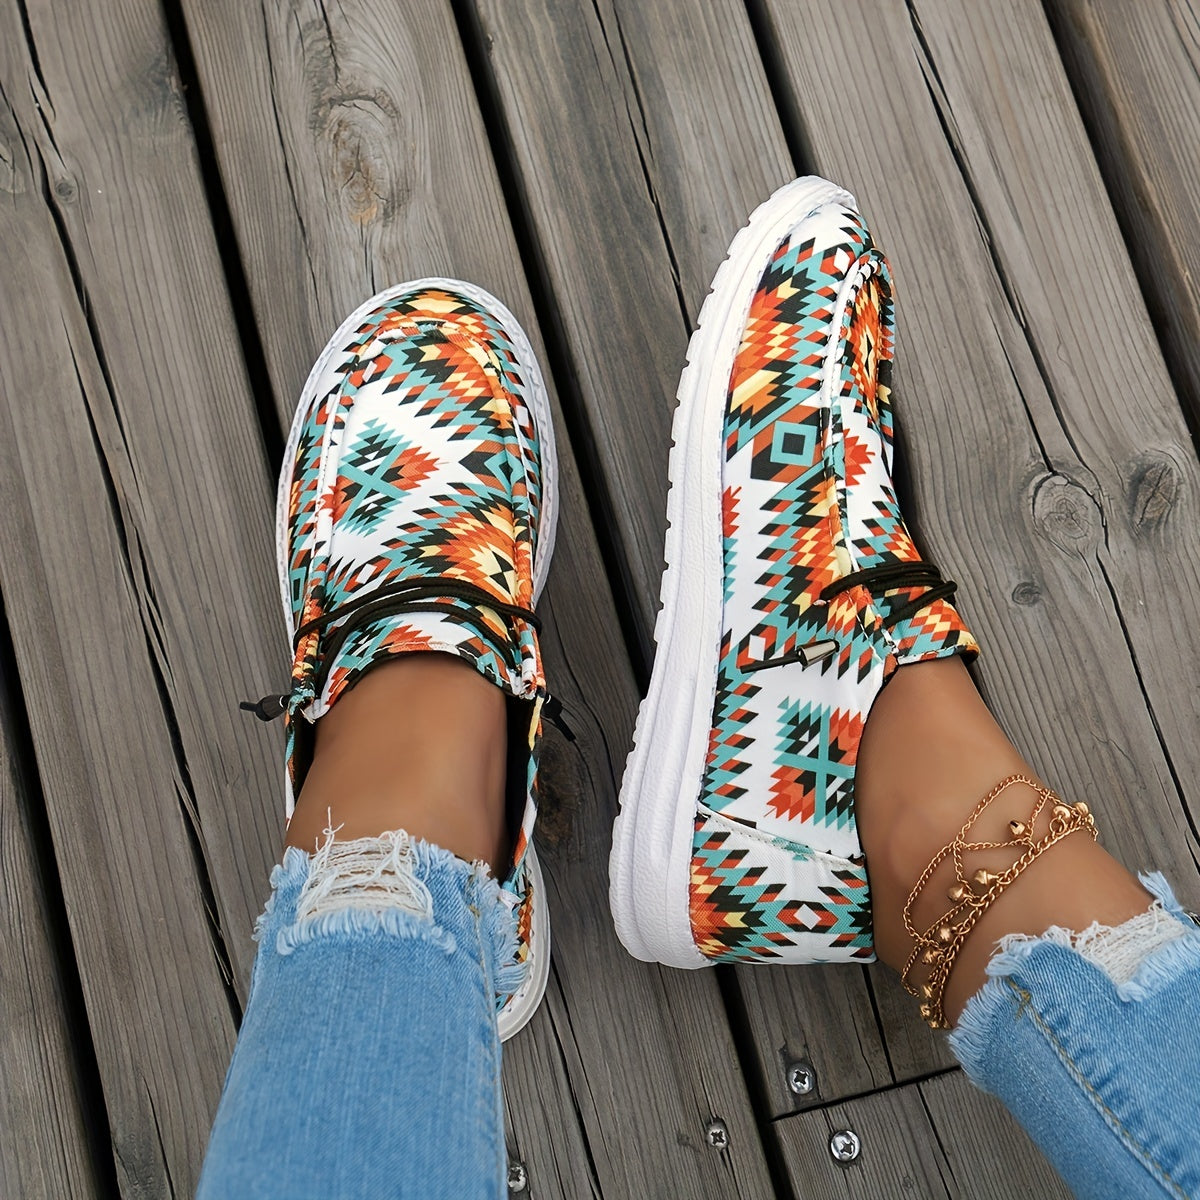 Women's Geometric Pattern Canvas Shoes, Casual Lace Up Outdoor Sneakers, Lightweight Low Top Shoes